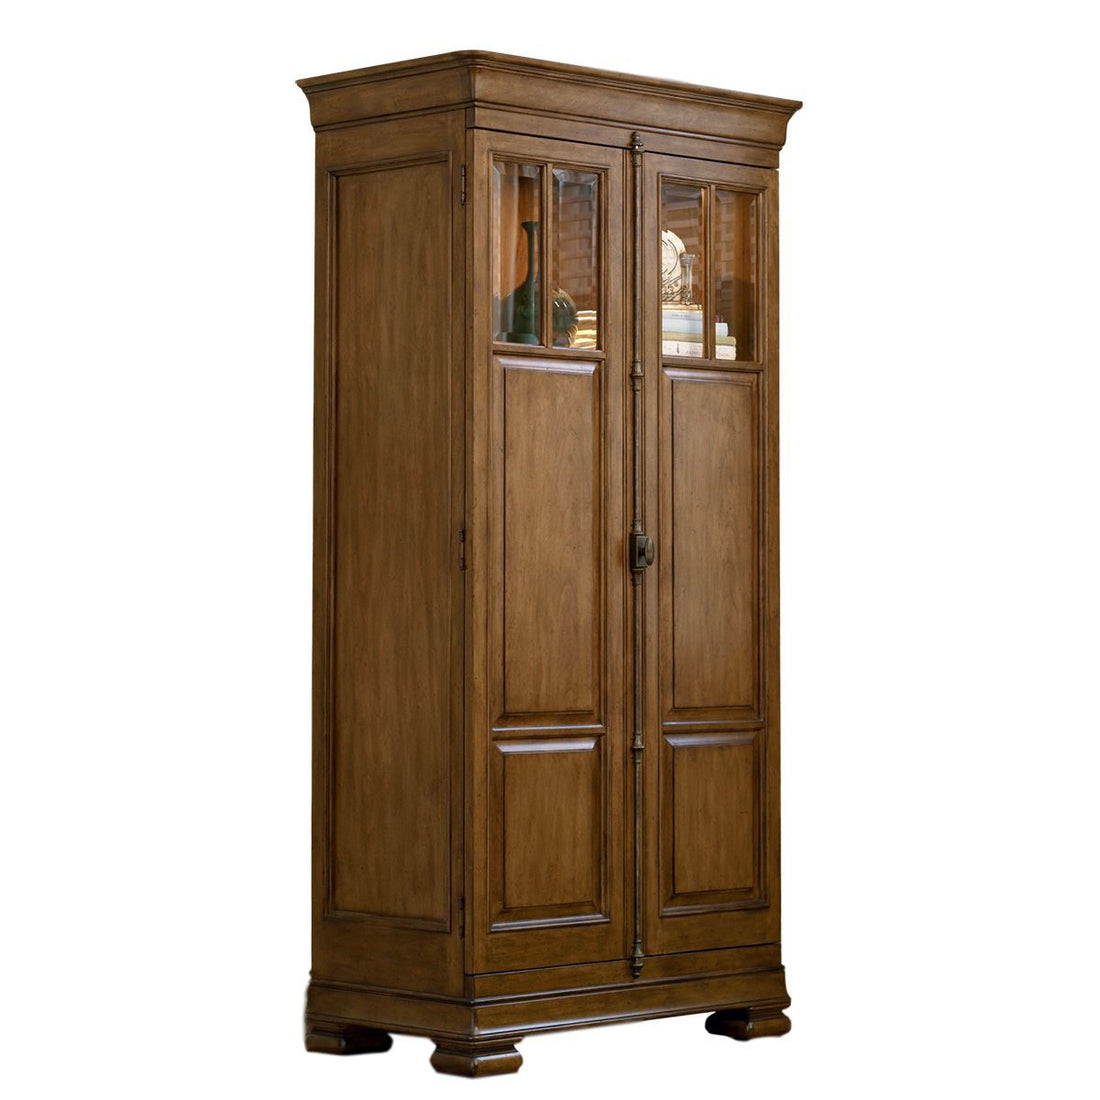 NEW LOU TALL CABINET